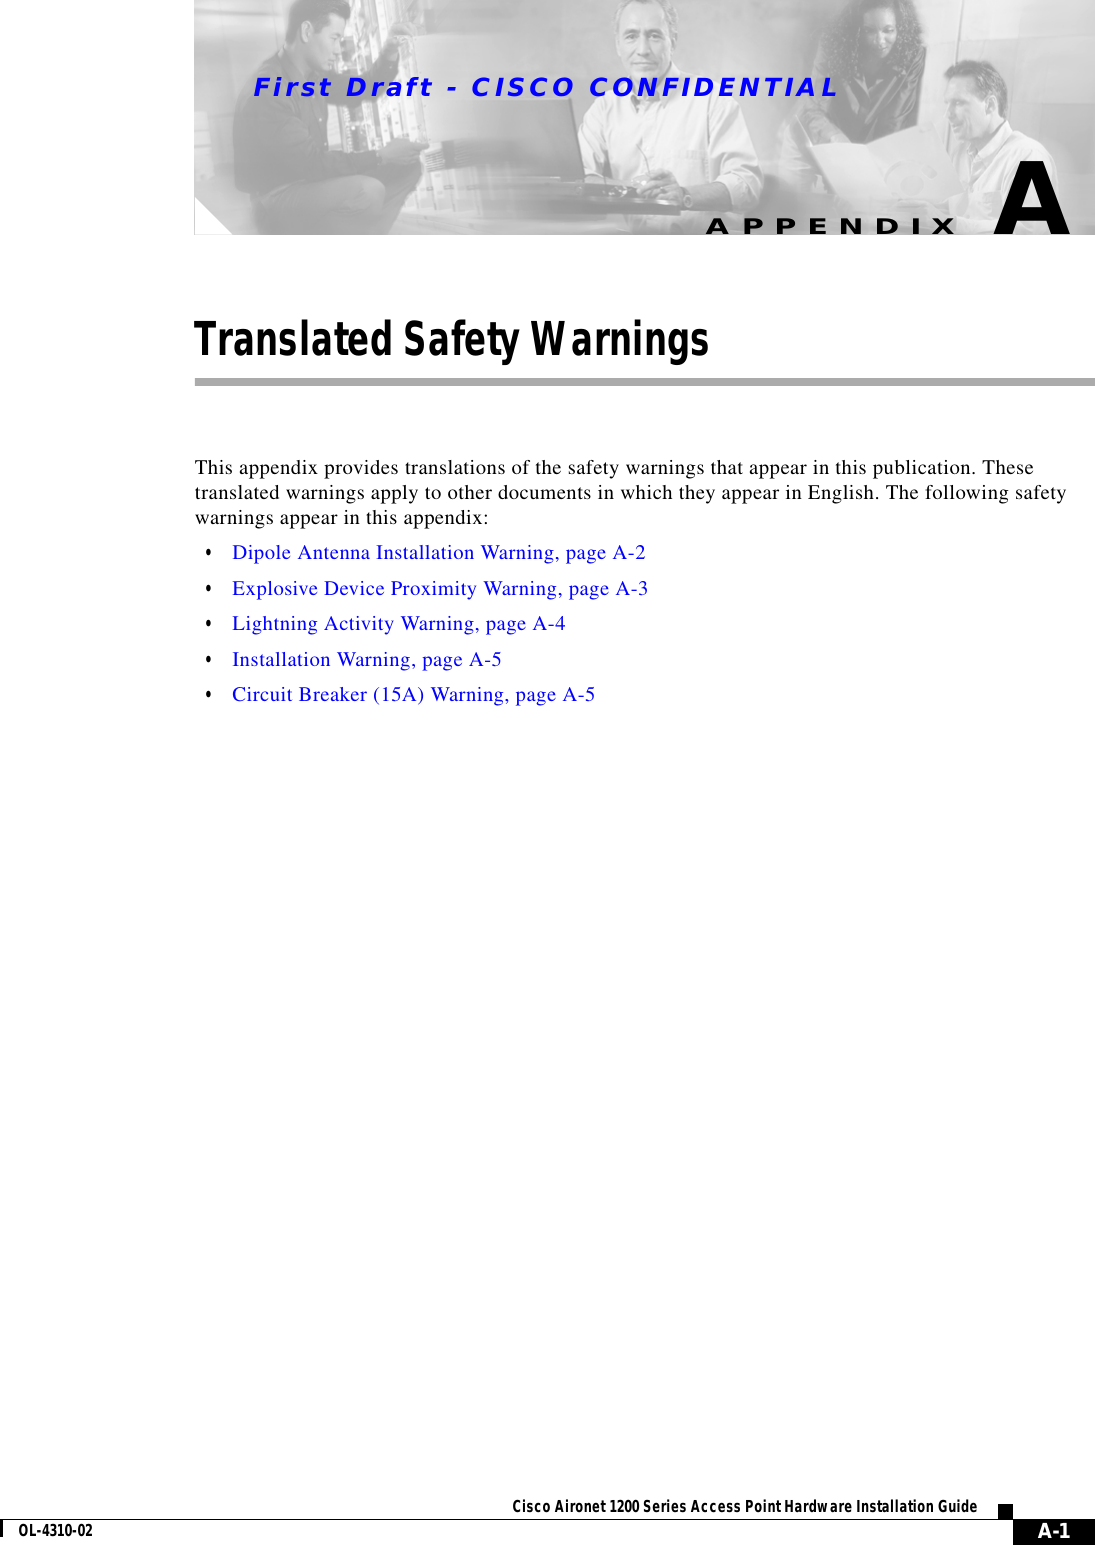 First Draft - CISCO CONFIDENTIALA-1Cisco Aironet 1200 Series Access Point Hardware Installation GuideOL-4310-02APPENDIXATranslated Safety WarningsThis appendix provides translations of the safety warnings that appear in this publication. These translated warnings apply to other documents in which they appear in English. The following safety warnings appear in this appendix:•Dipole Antenna Installation Warning, page A-2•Explosive Device Proximity Warning, page A-3•Lightning Activity Warning, page A-4•Installation Warning, page A-5•Circuit Breaker (15A) Warning, page A-5